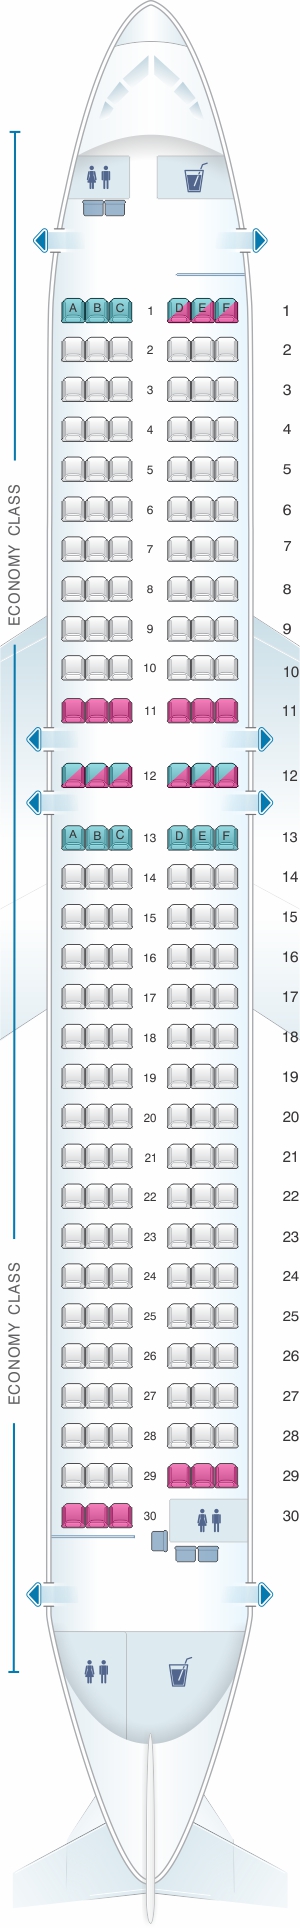 Seat map for QantasLink Airbus A320 200